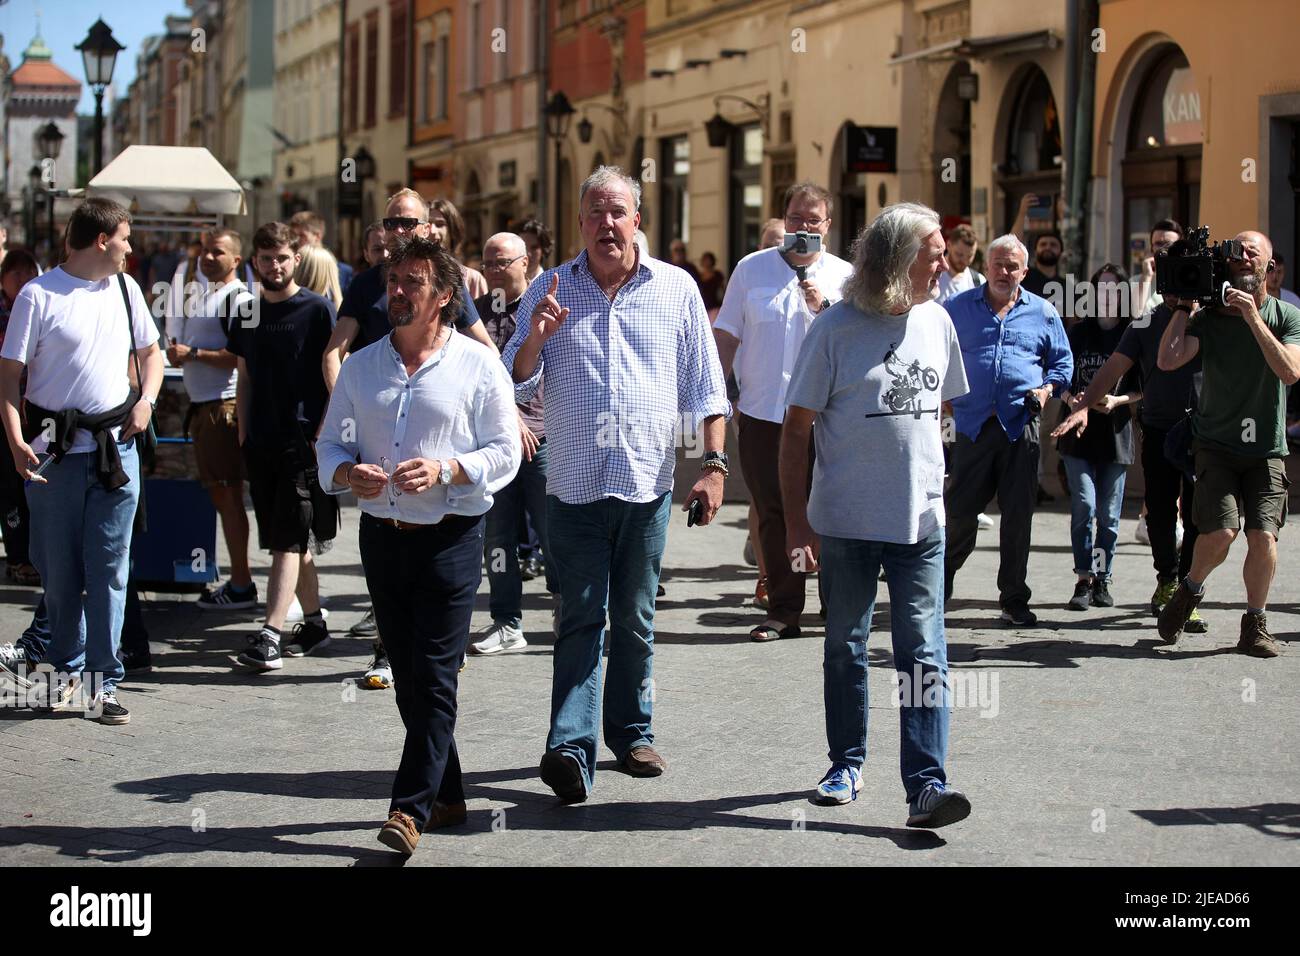 The Grand Tour stars, Jeremy Clarkson, Richard Hammond and James May, walk along the Main Square in Cracow, Poland, while on tour filming the show. The Grand Tour is a British motoring television series, created by Jeremy Clarkson, Richard Hammond, James May, and Andy Wilman, made for Amazon exclusively for its online streaming service Amazon Prime Video which premiered in 2016. The programme was conceived in the wake of the departure of Clarkson, Hammond, May and Wilman from the BBC series Top Gear. (Photo by Vito Corleone/SOPA Images/Sipa USA) Stock Photo